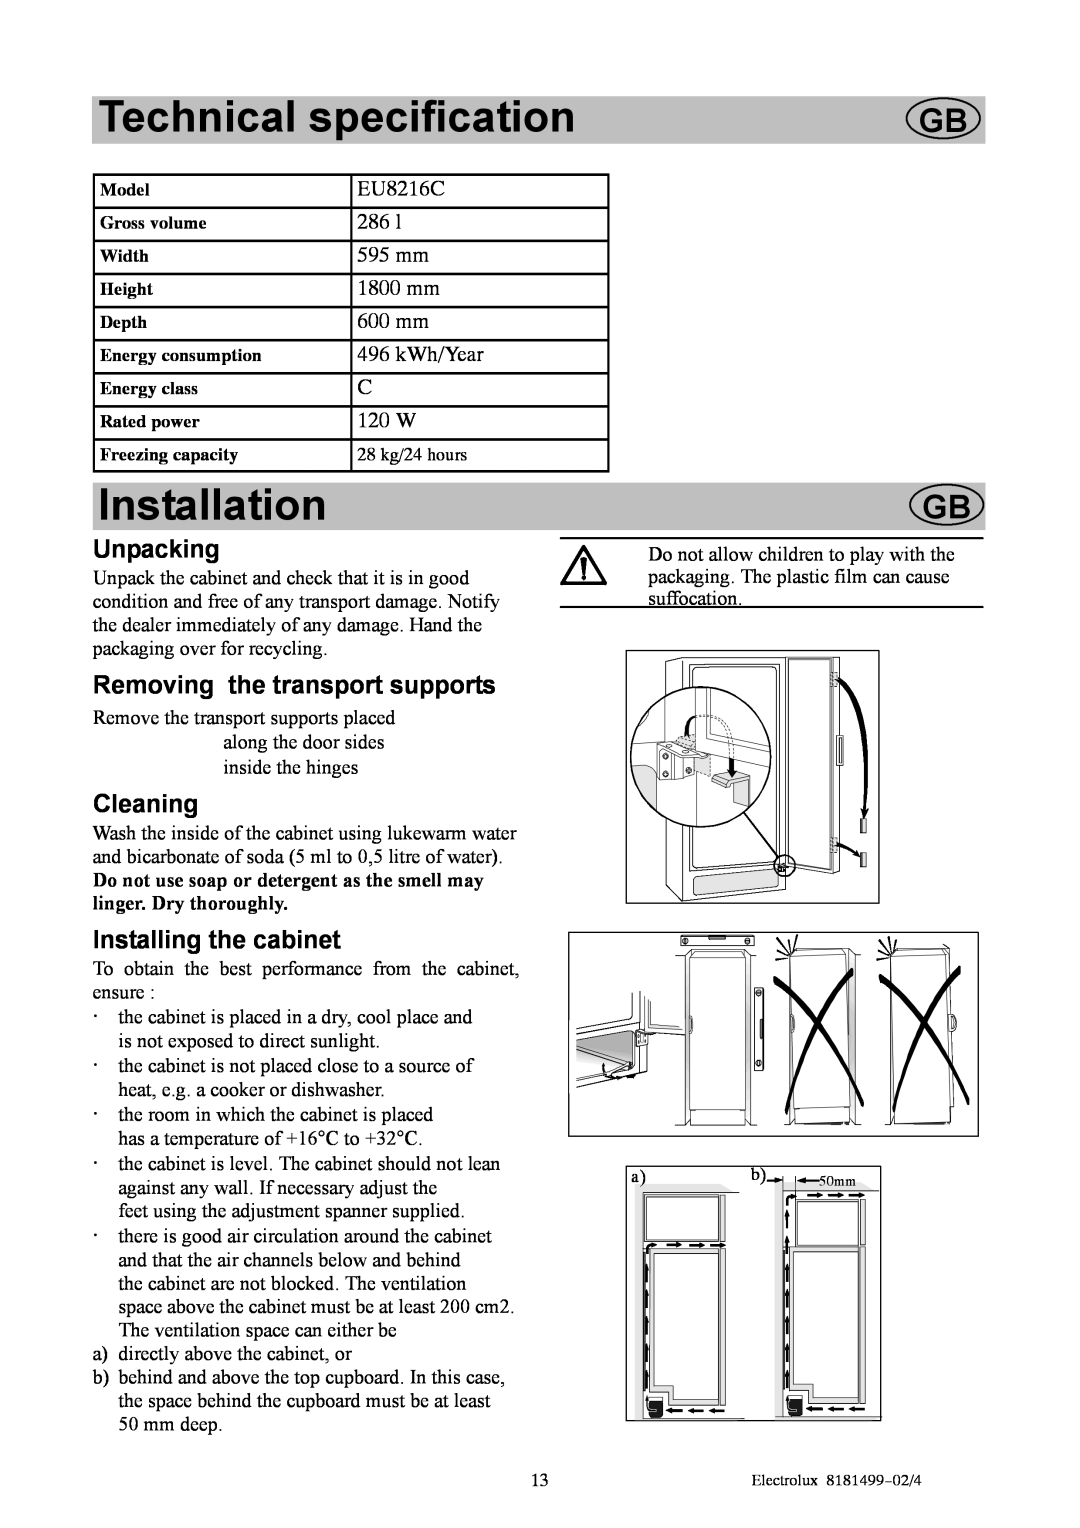 Electrolux EU8216C Technical specification, Installation, Unpacking, Removing the transport supports, Cleaning, 286 l 